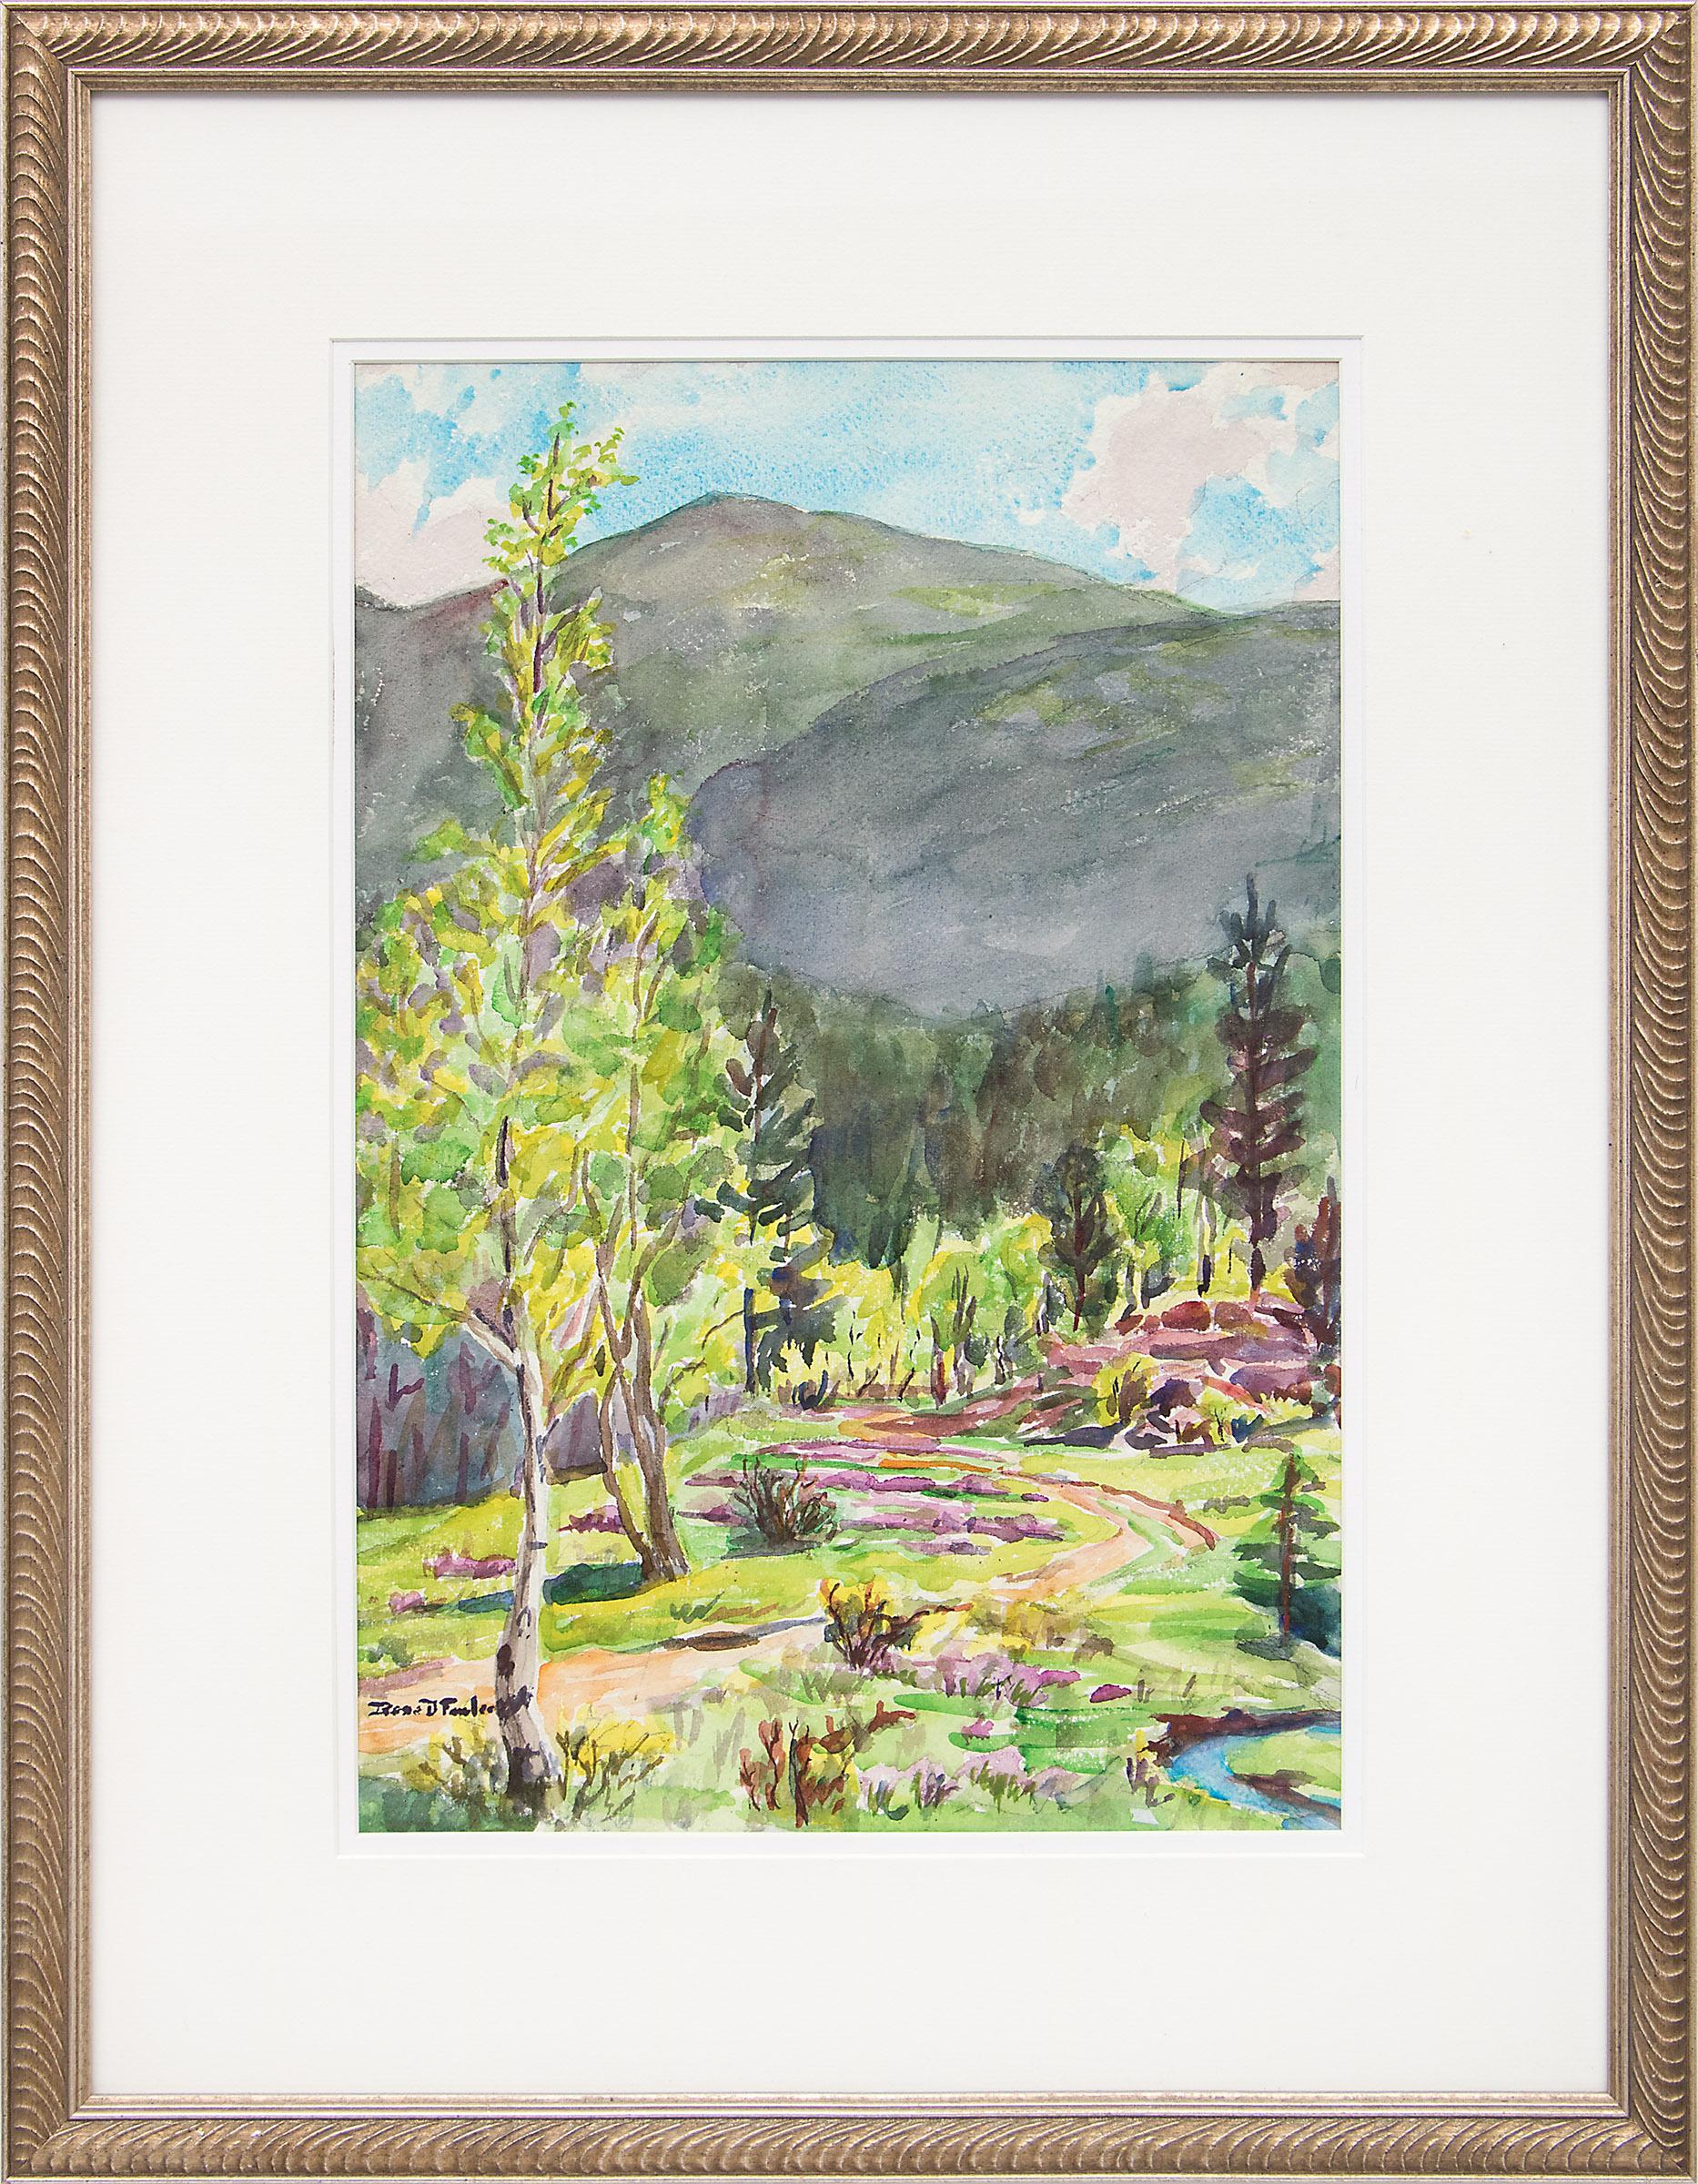 Early Summer, Colorado Mountains, 1950s Landscape with Aspens, Pines & Stream - Painting by Irene D. Fowler